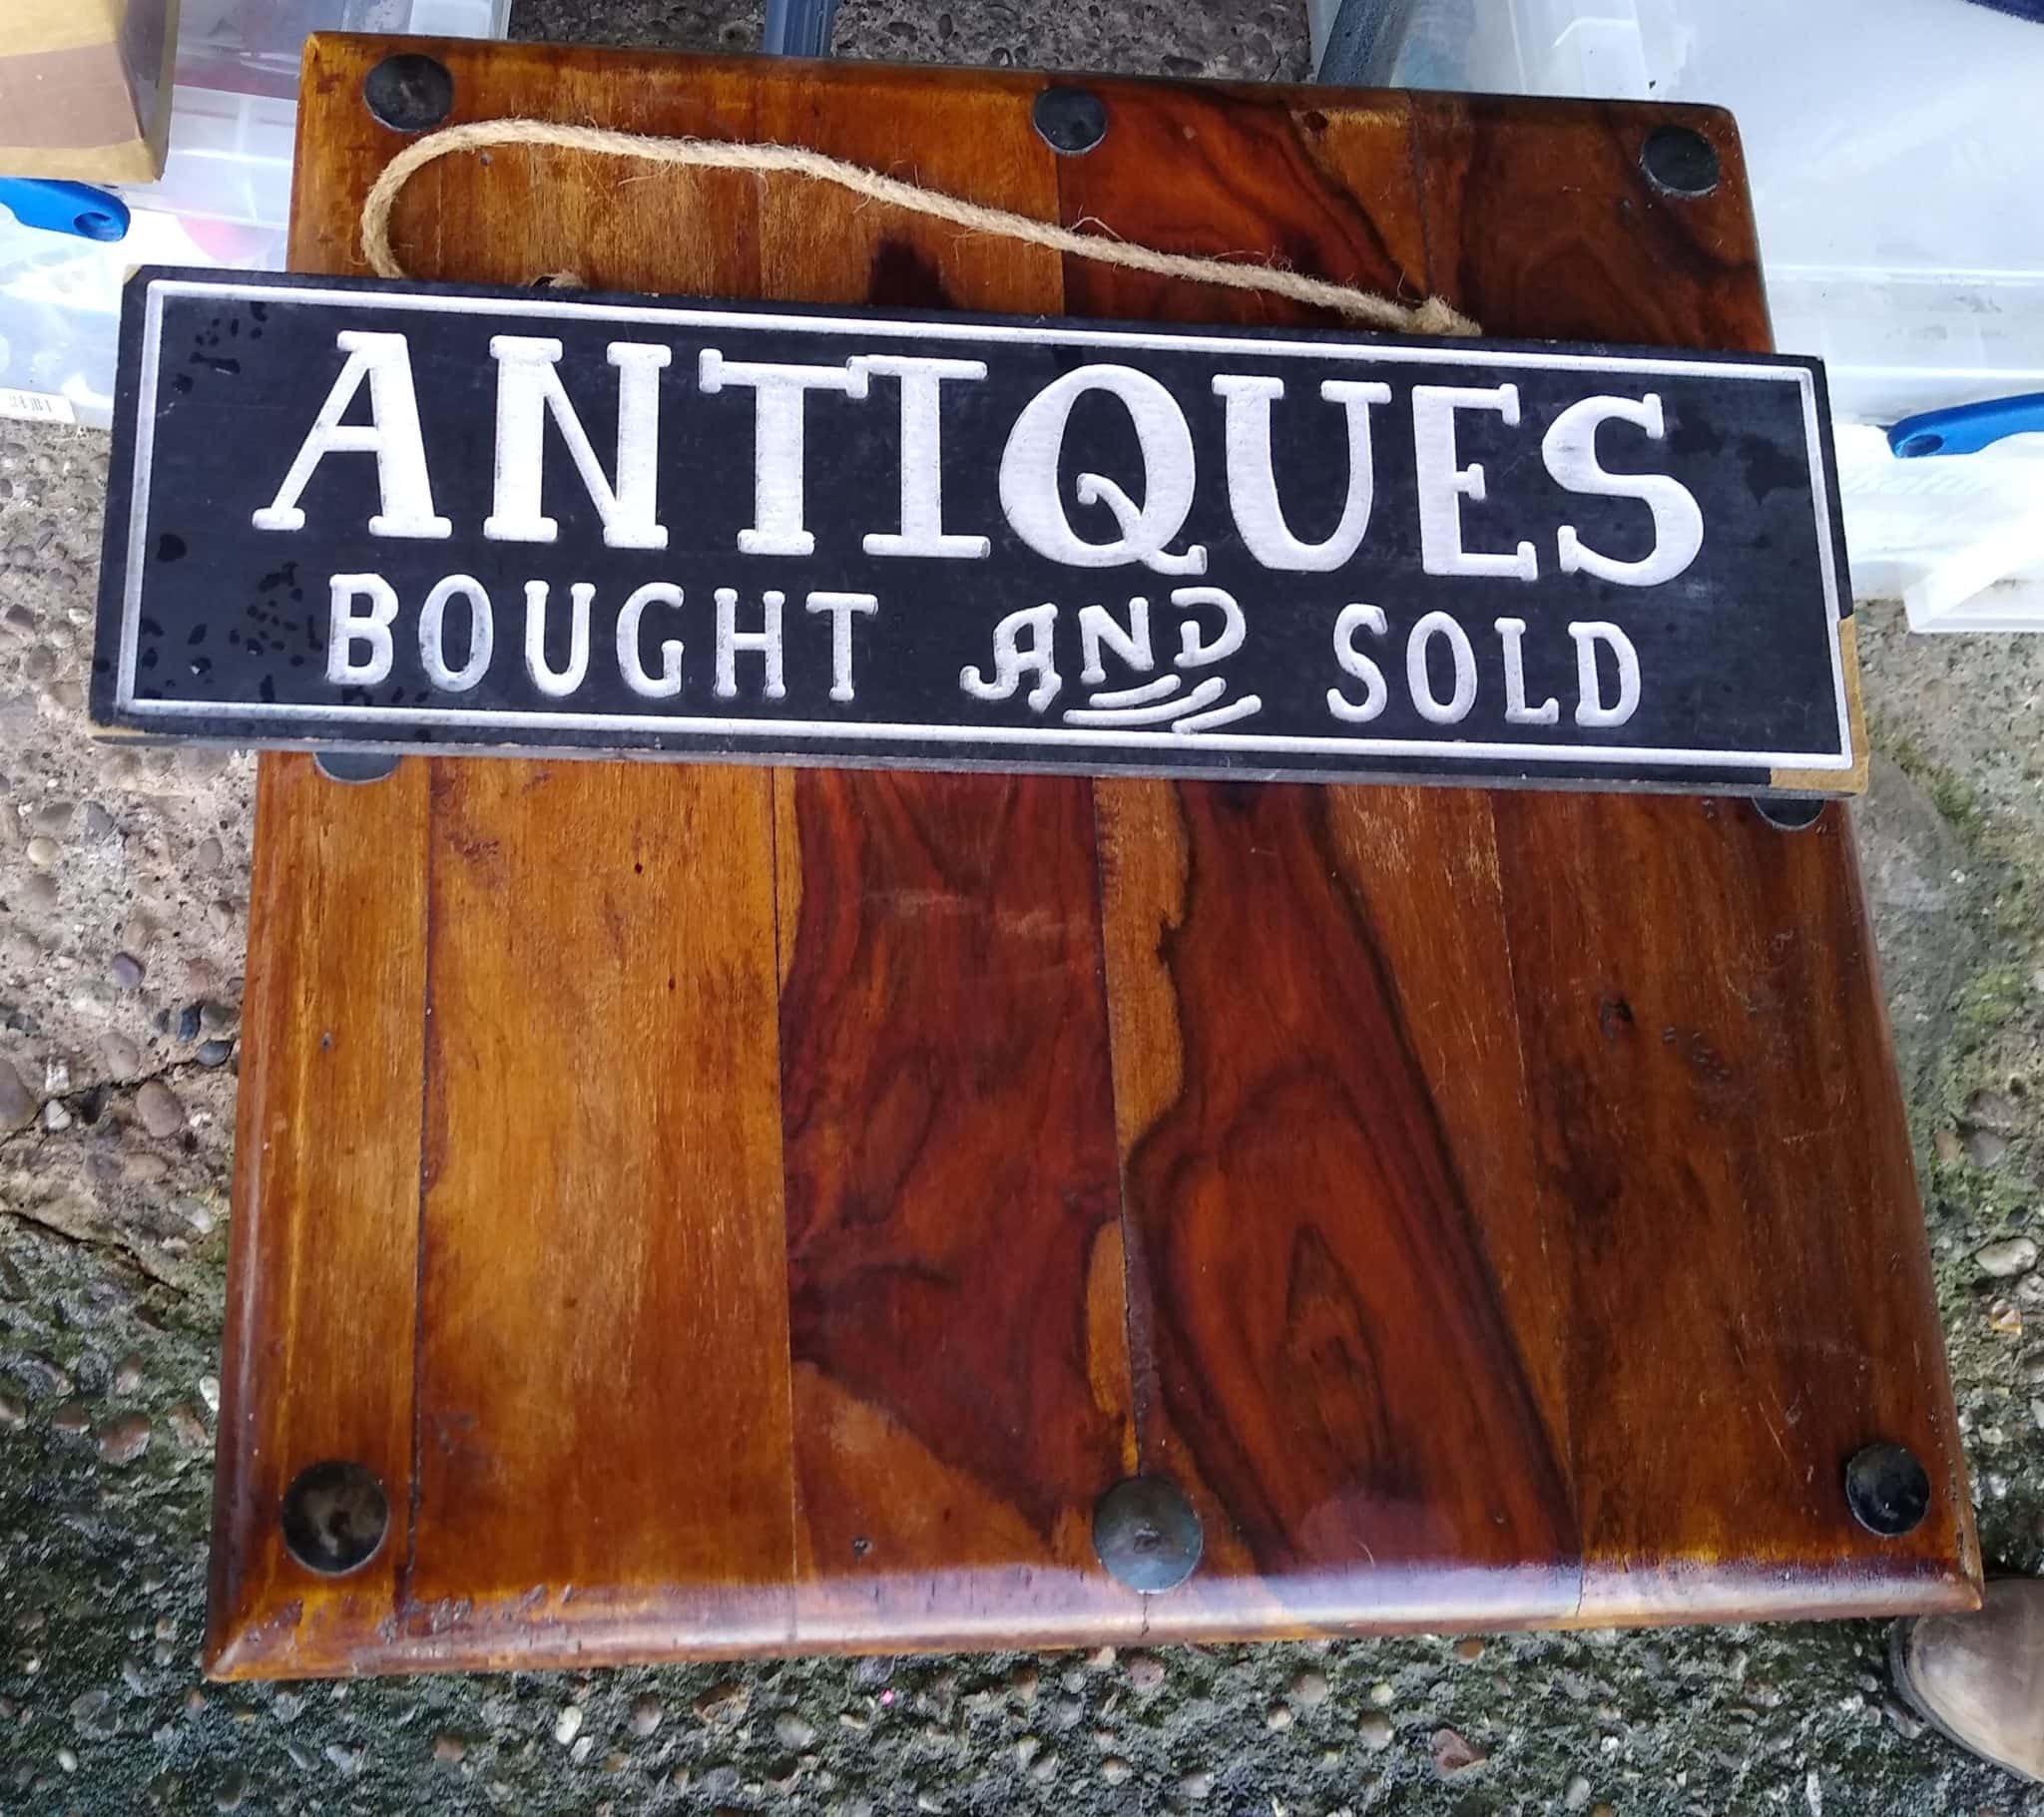 Decorating with antiques